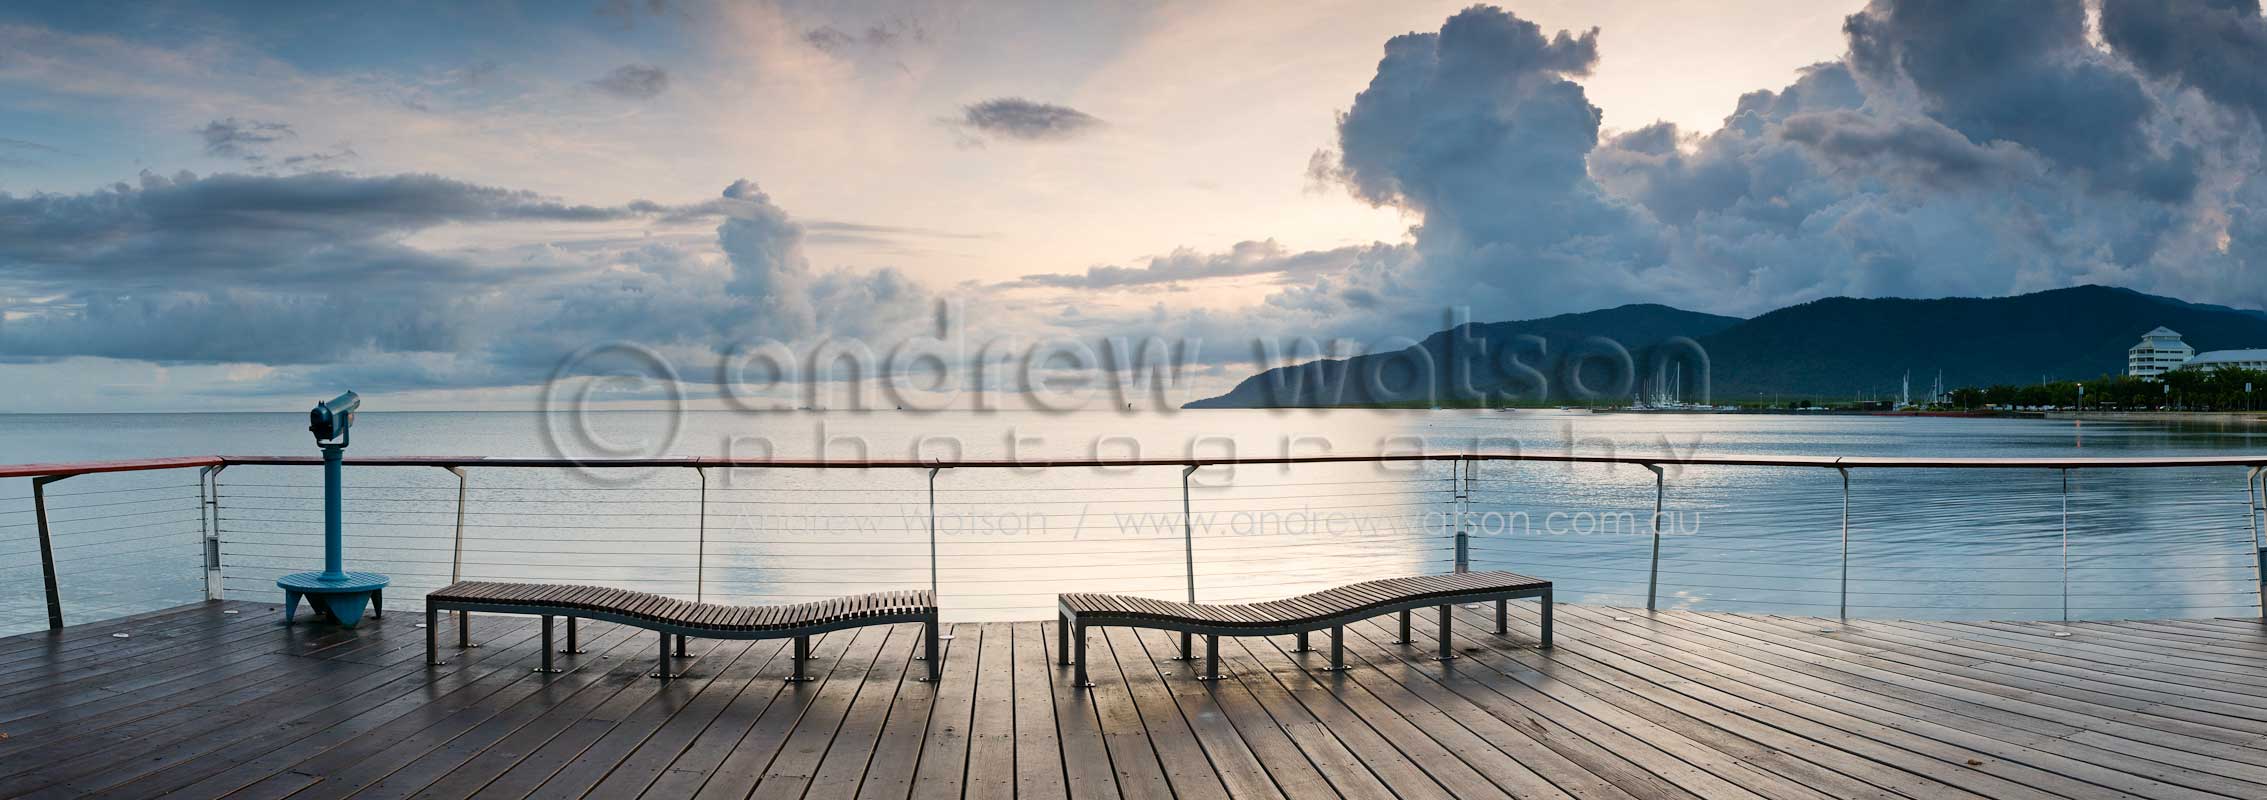 Viewing deck on Cairns Esplanade boardwalkCairns, North QueenslandImage available for licensing or as a fine-art print... please enquire